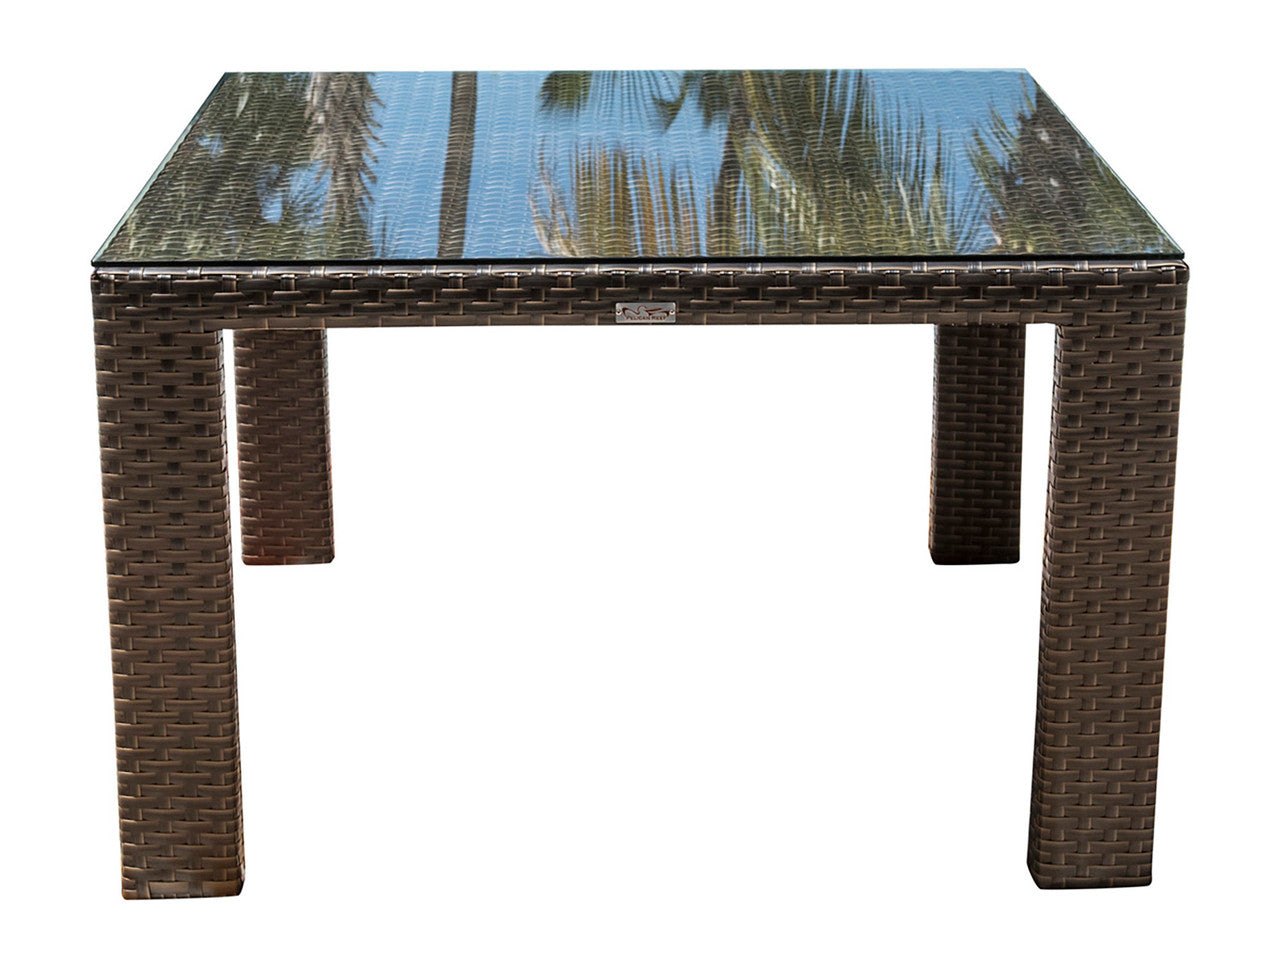 Hospitality Rattan Fiji Square Woven Dining Table w/ Glass